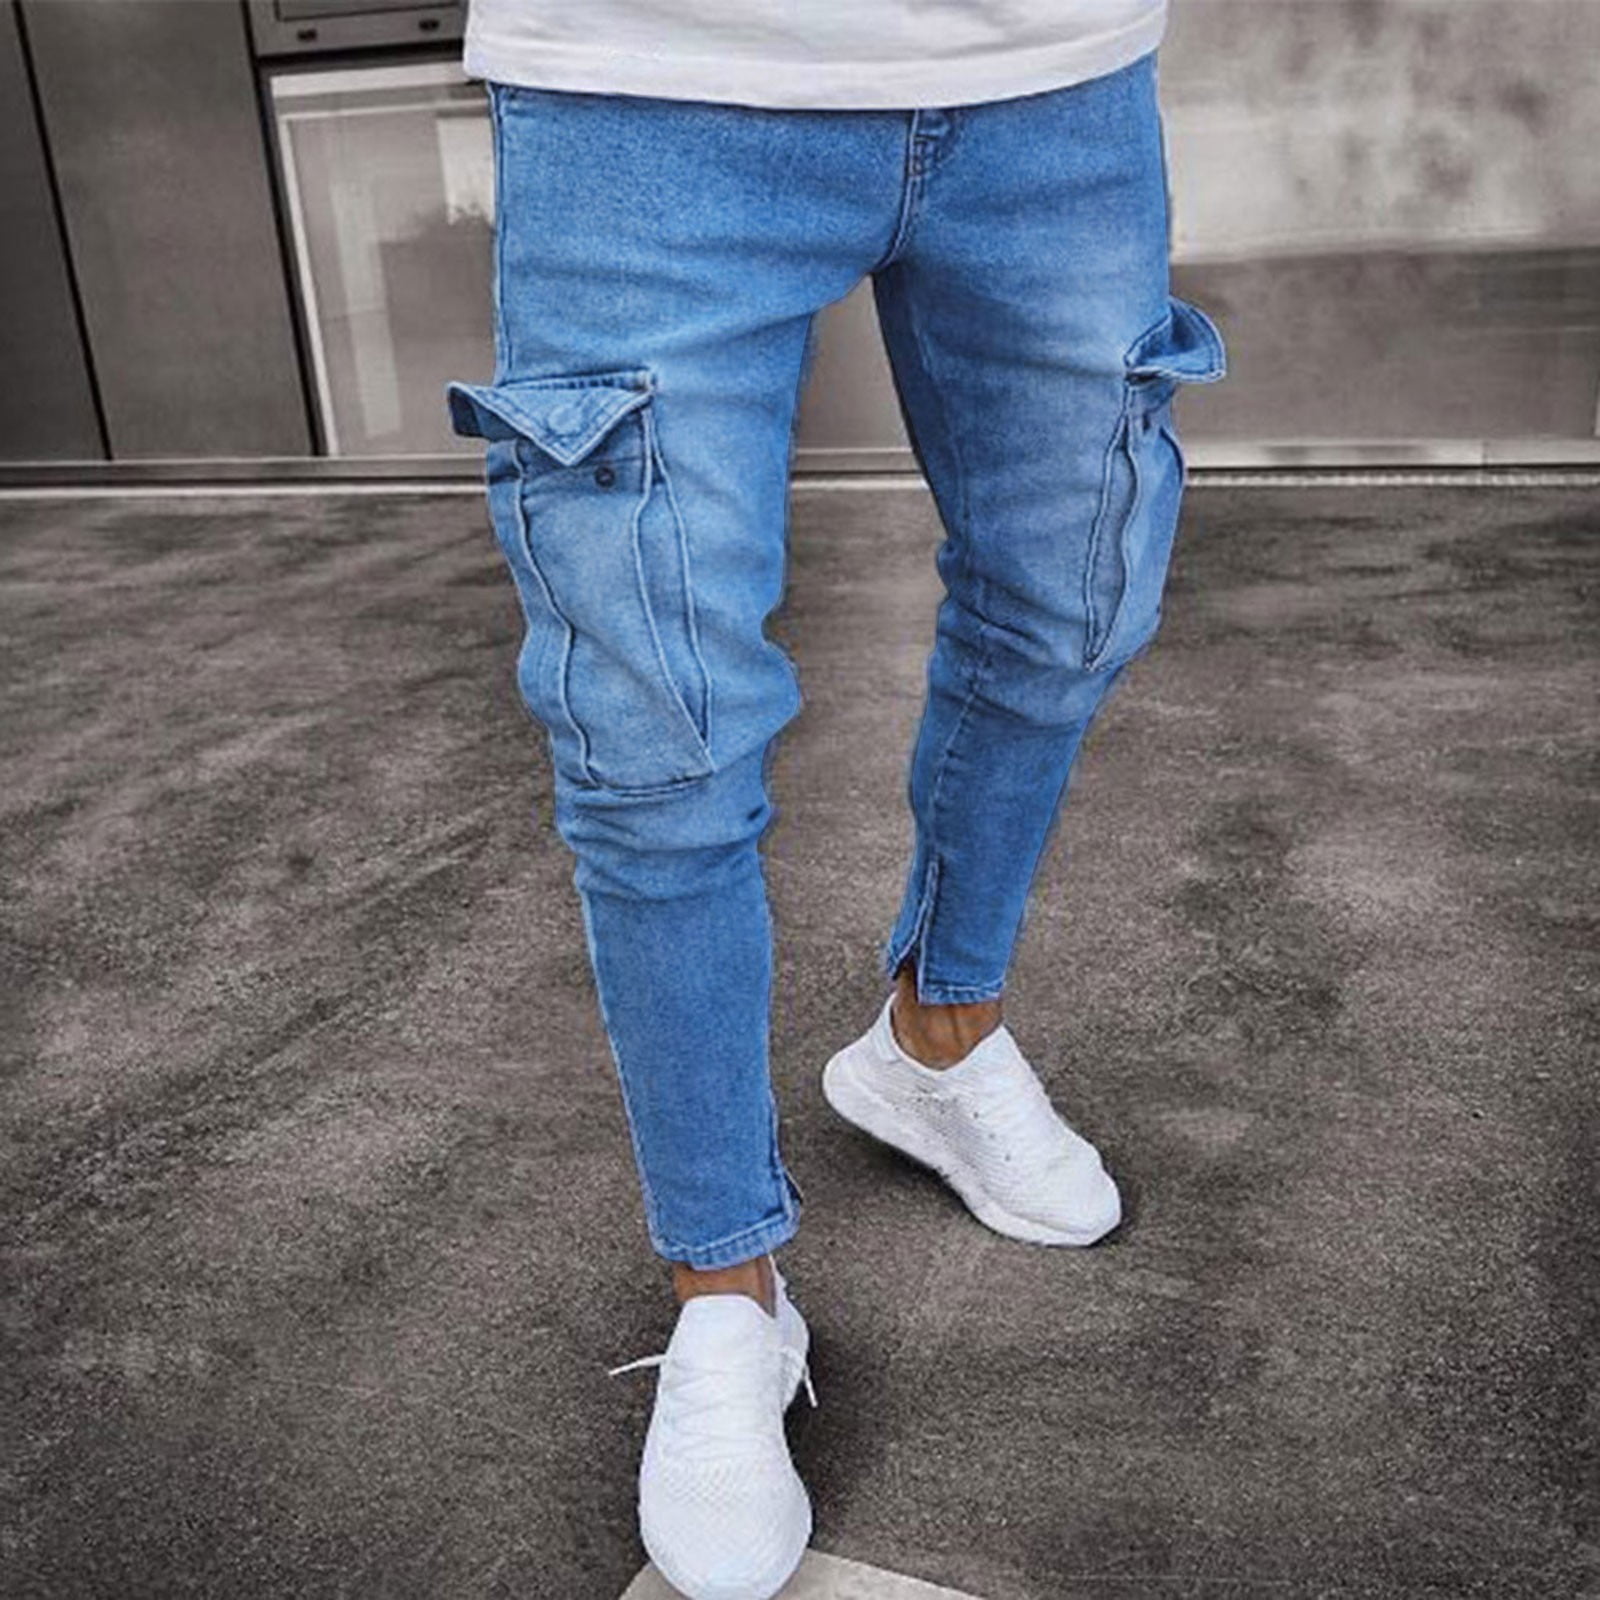 Women Denim Pants Ripped Knee Cut Jeans Faded Slim Fit Lady Skinny Leggings  Hole High Waist Pencil Pants3862090 From Nmmn, $29.26 | DHgate.Com